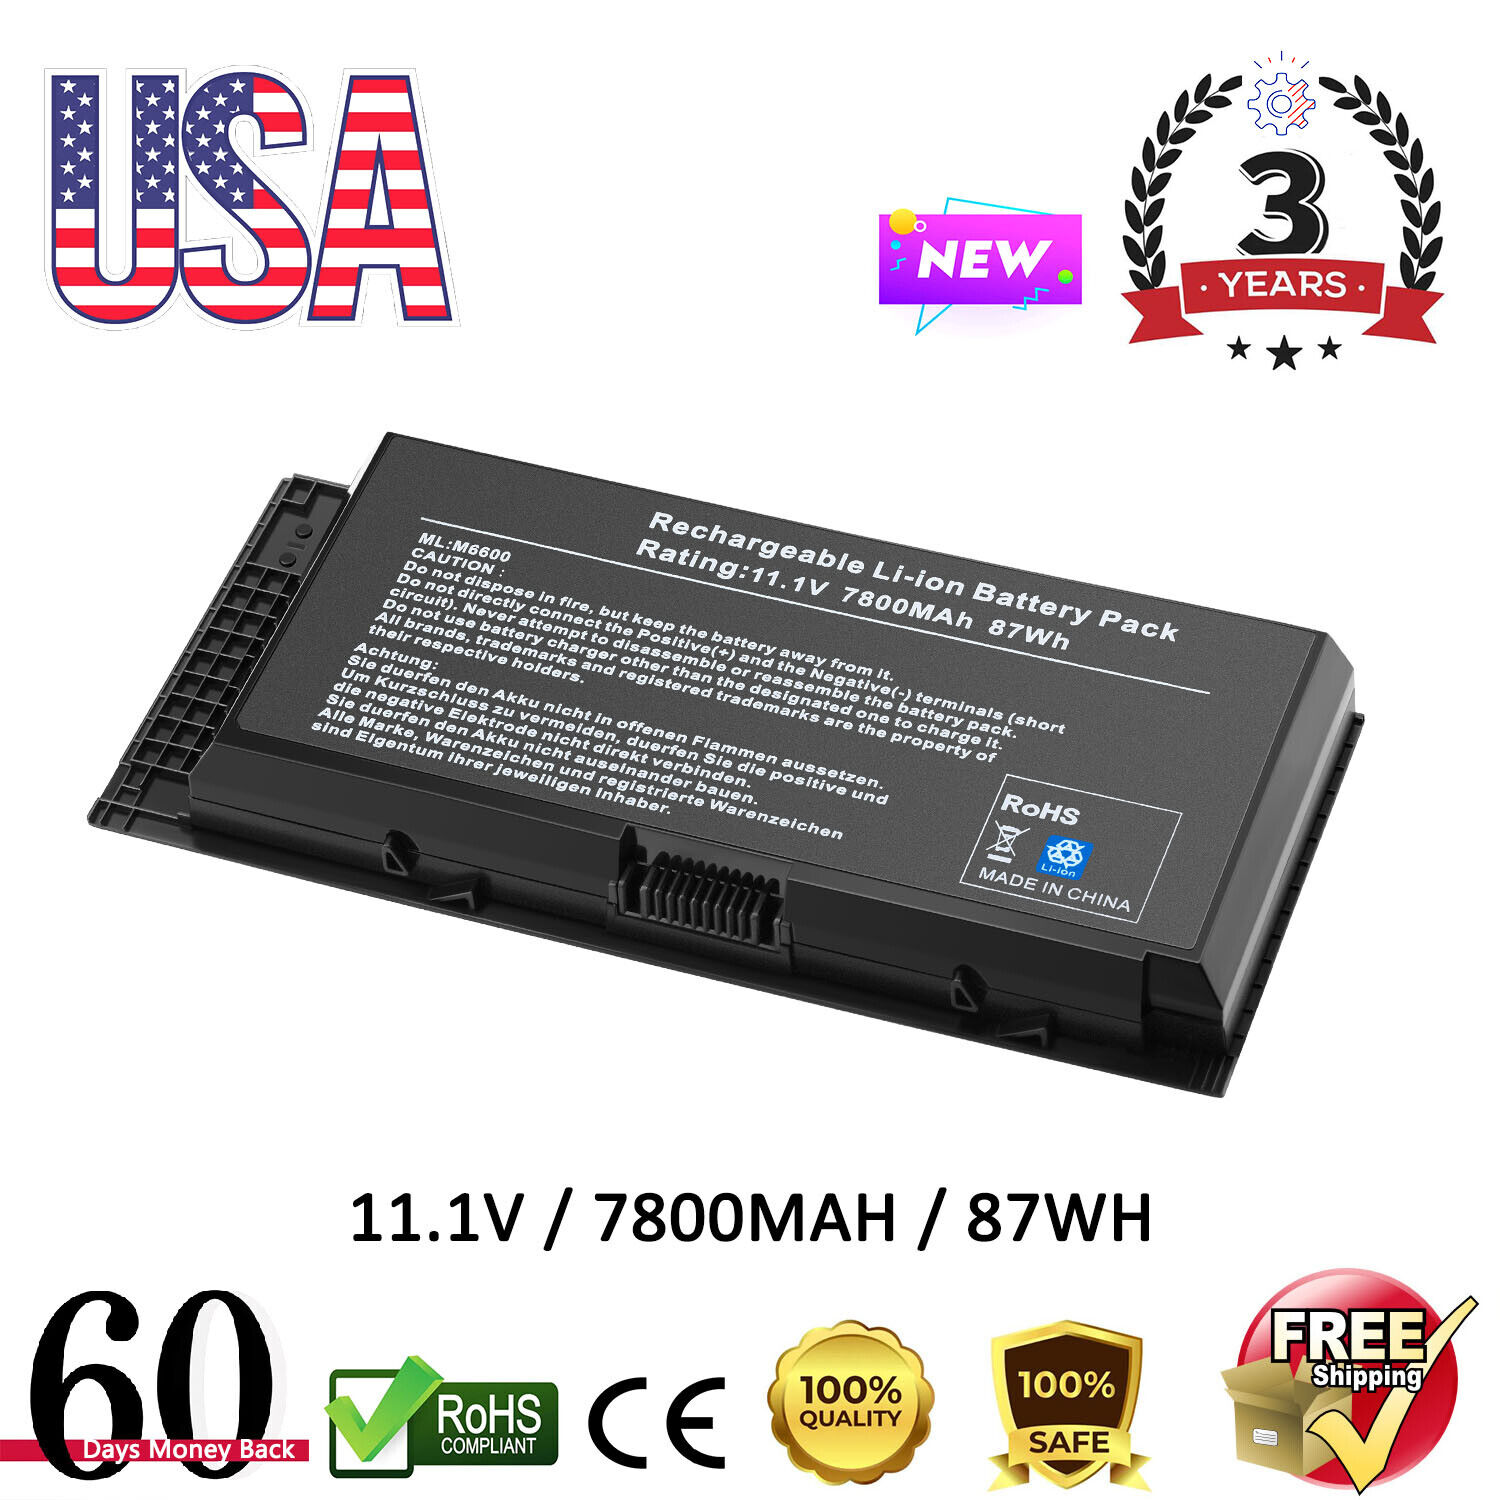 9Cell Battery for Dell Precision M4600 M4700 M4800 M6600 M6700 M6800 FV993 FJJ4W